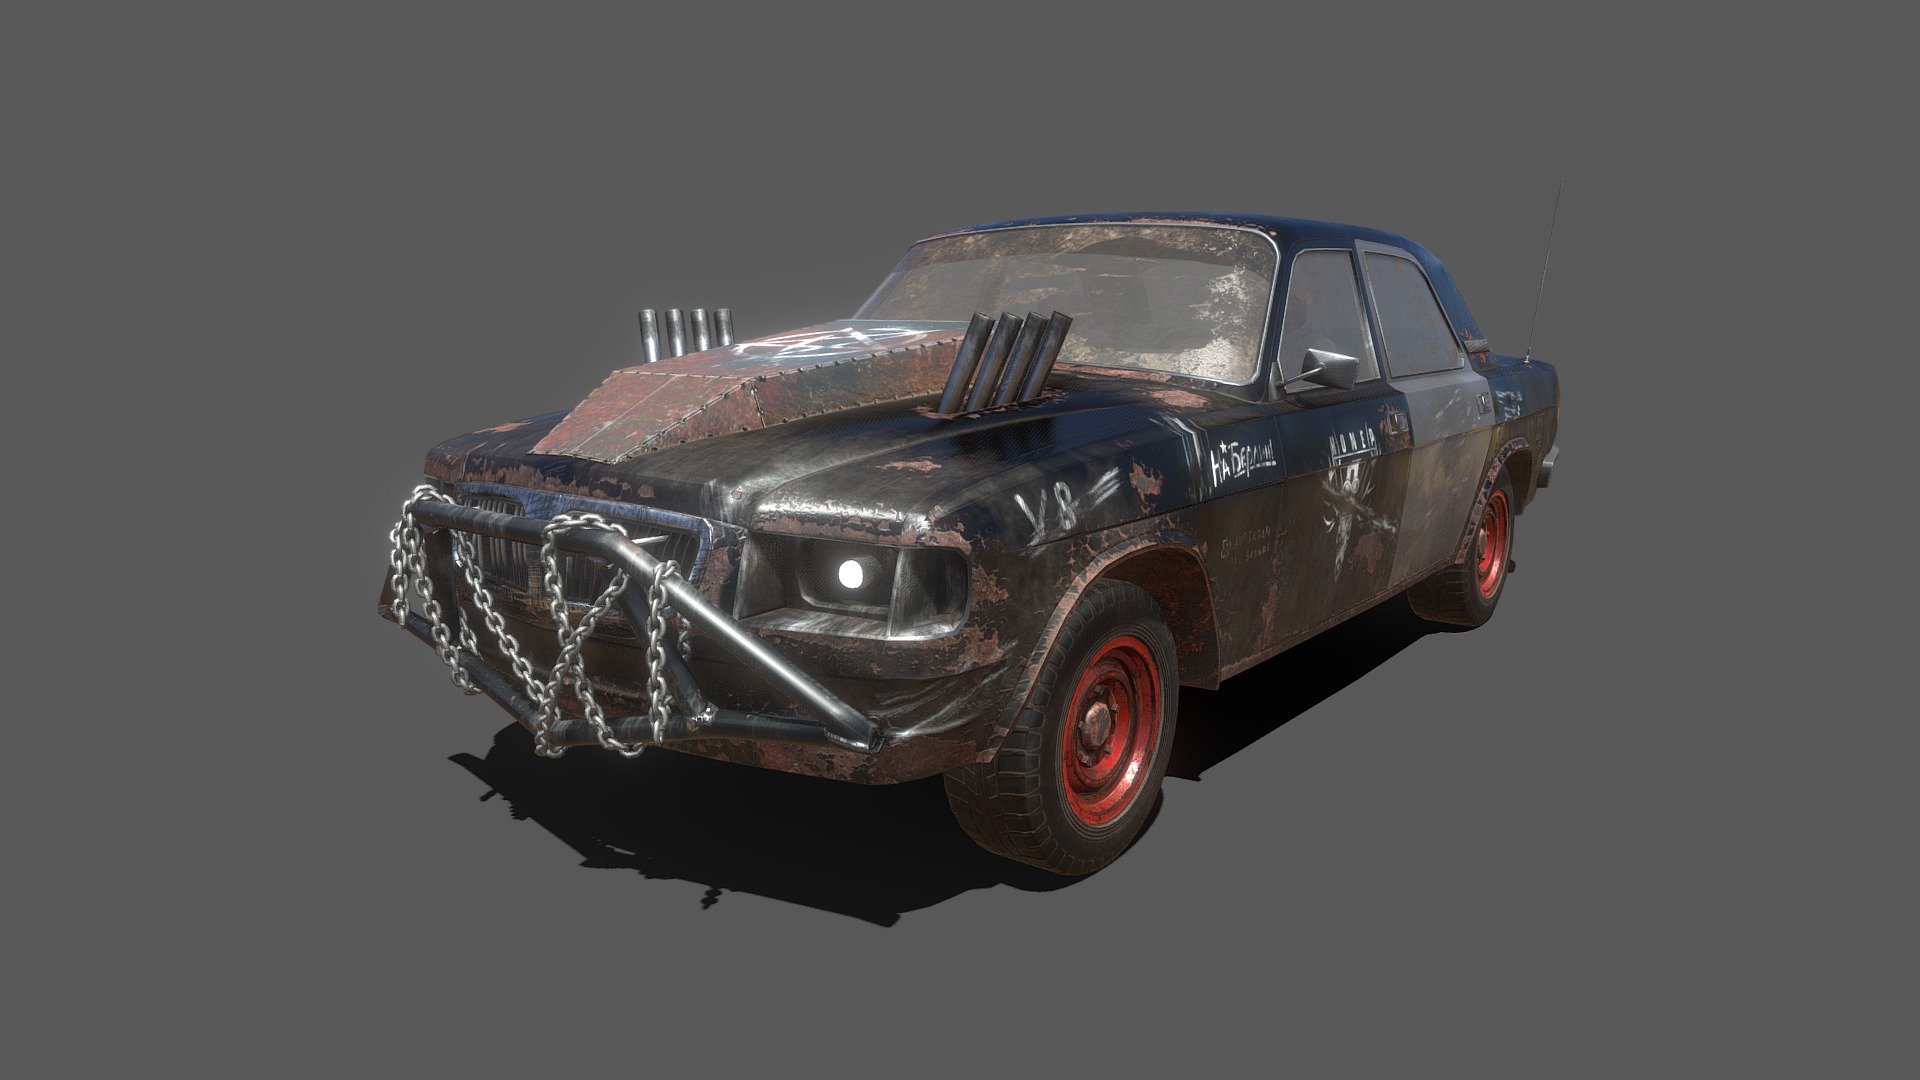 1990-2000s crappy Russian car with V8 engine (inspired by Val Channel). Feedback! - Post-Soviet Necro-car - Download Free 3D model by o4kas 3d model